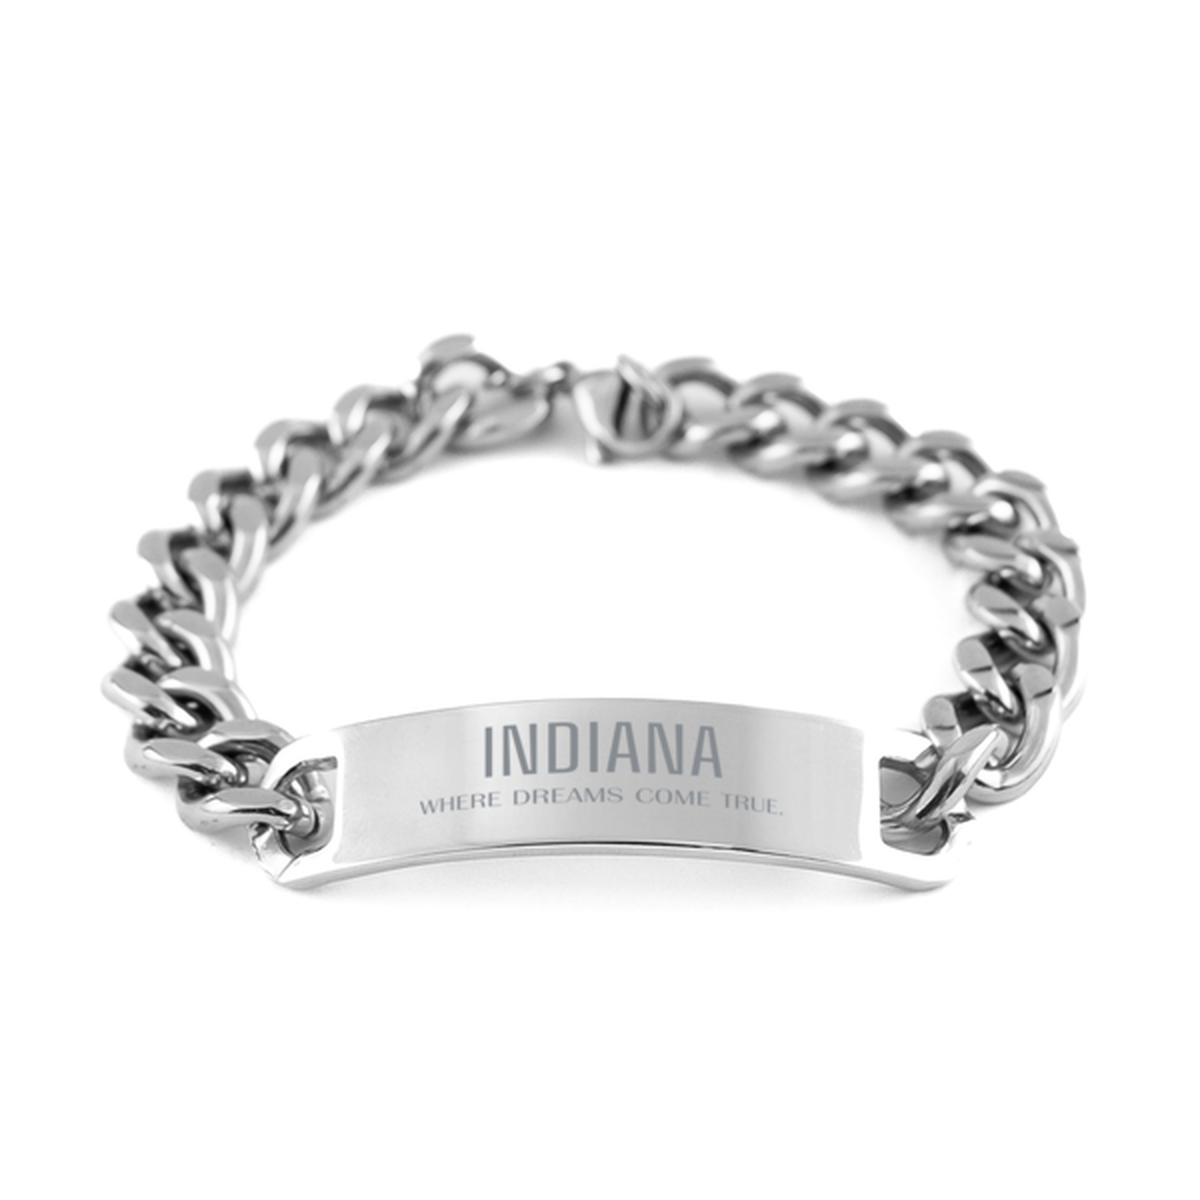 Love Indiana State Cuban Chain Stainless Steel Bracelet, Indiana Where dreams come true, Birthday Inspirational Gifts For Indiana Men, Women, Friends